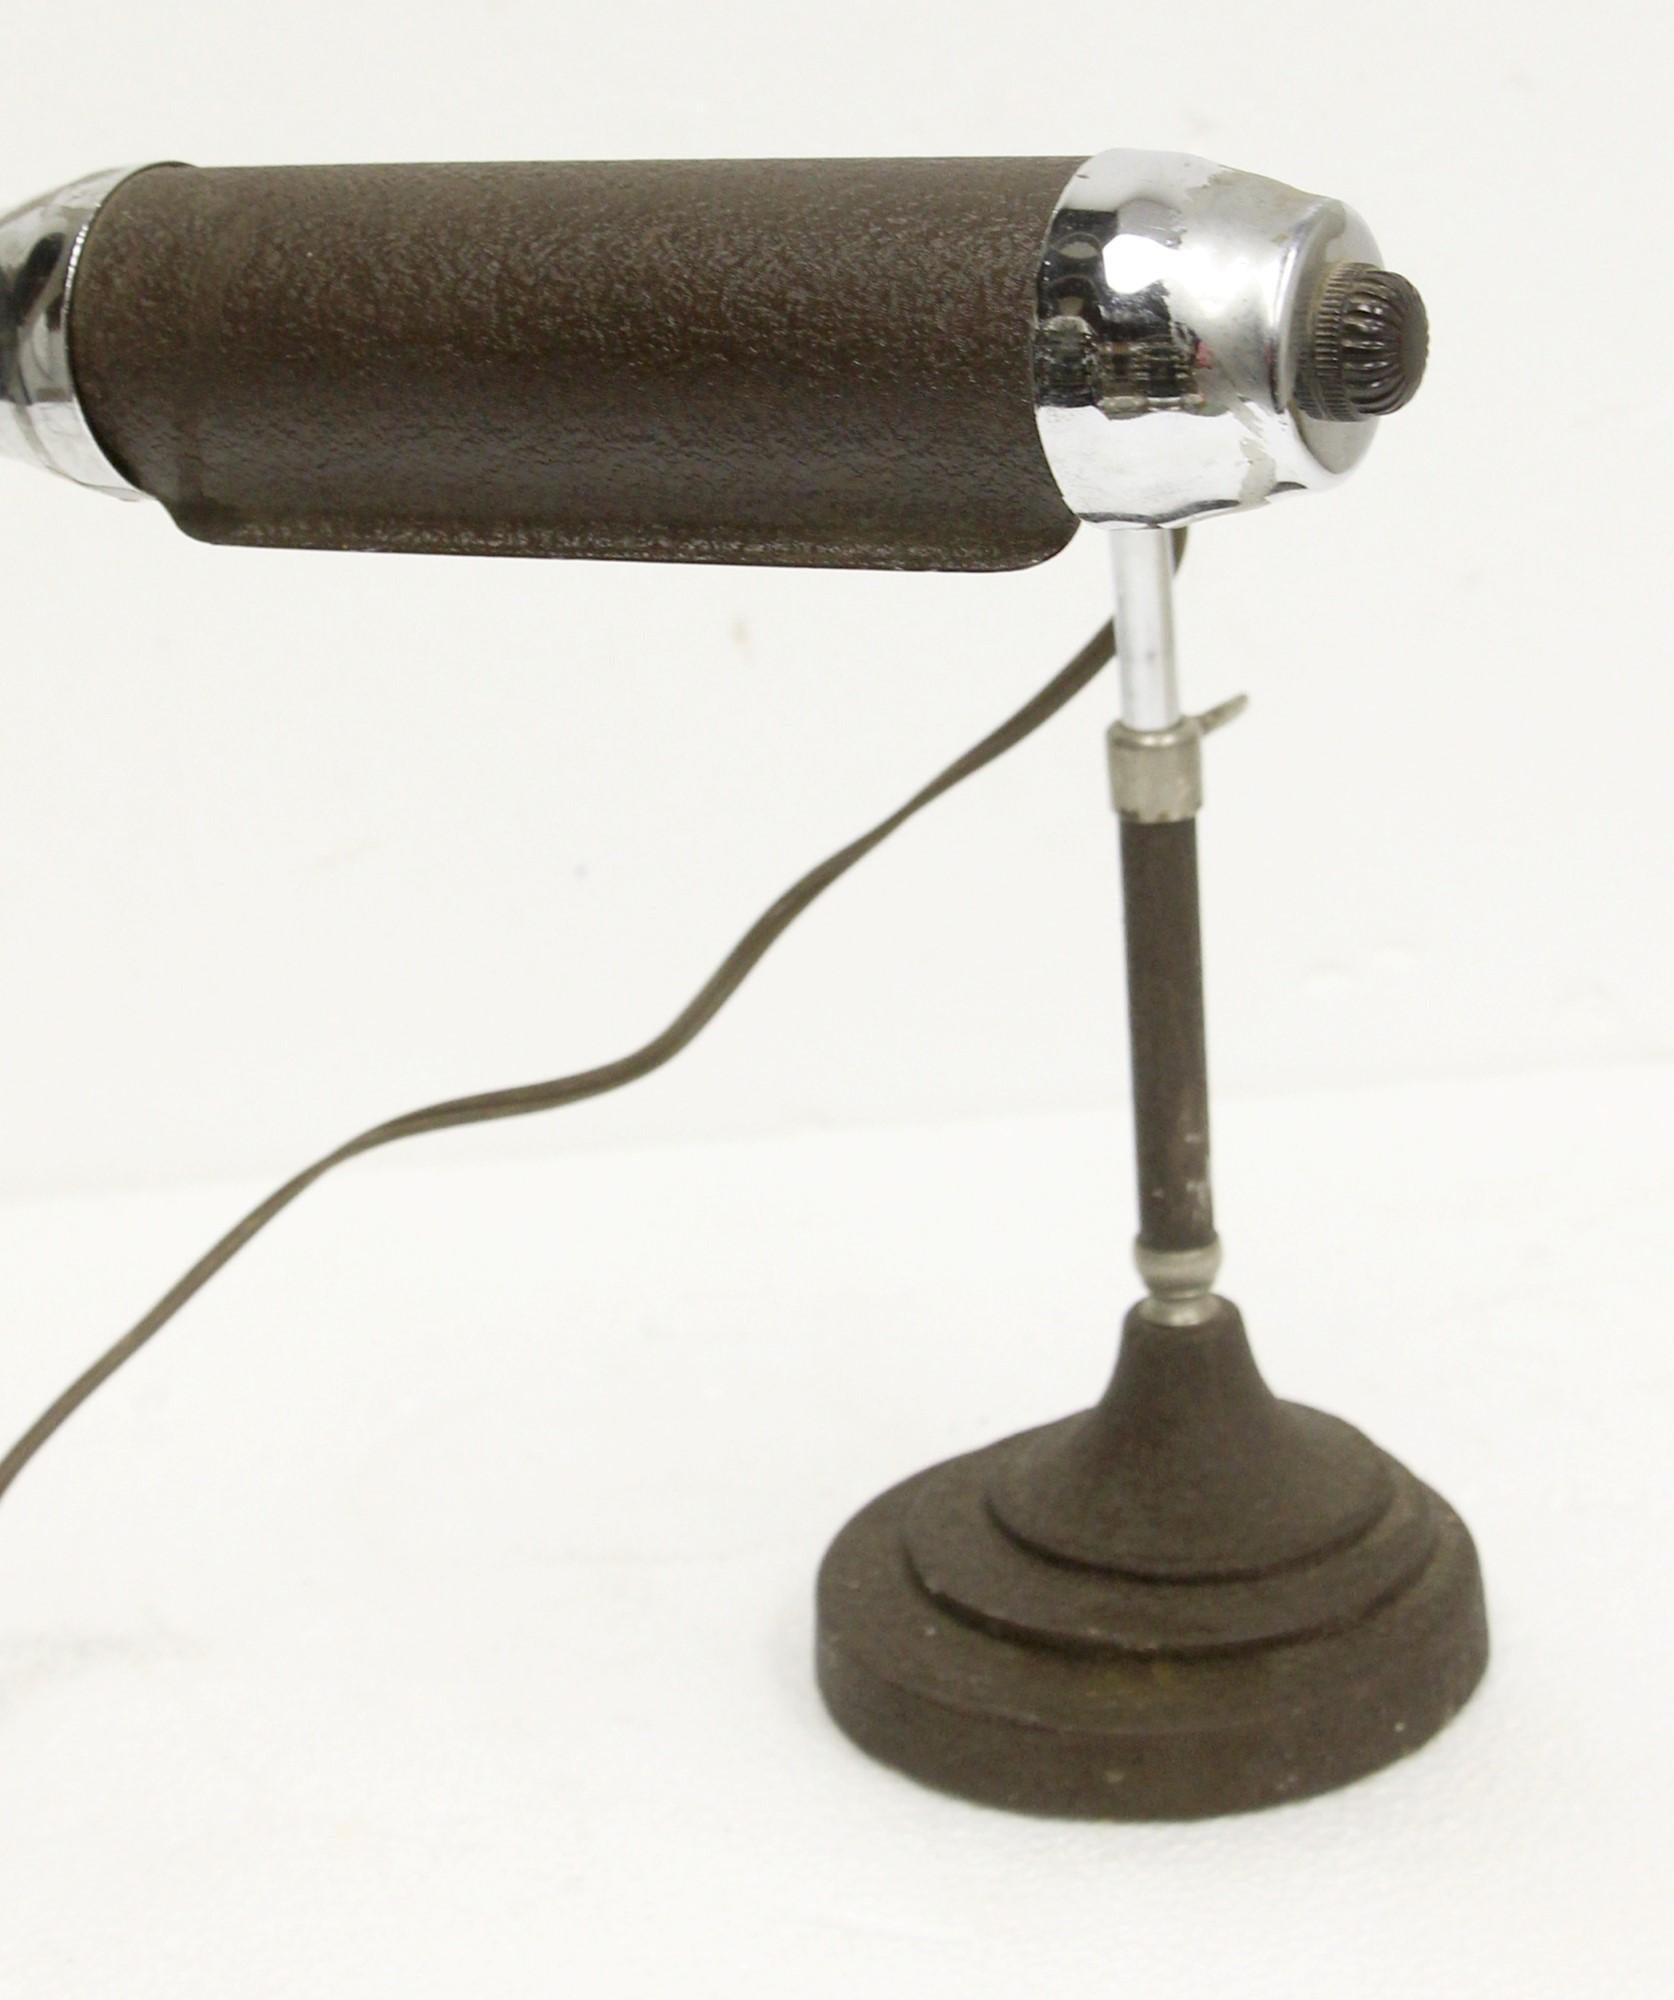 This 1950s vintage piano desk lamp is in the Art Deco style. The finish is a textured brown enamel with a deco base, along with chrome ends in the skyscraper design. The lamp is adjustable, and it takes a long tubular screw in bulb. This can be seen